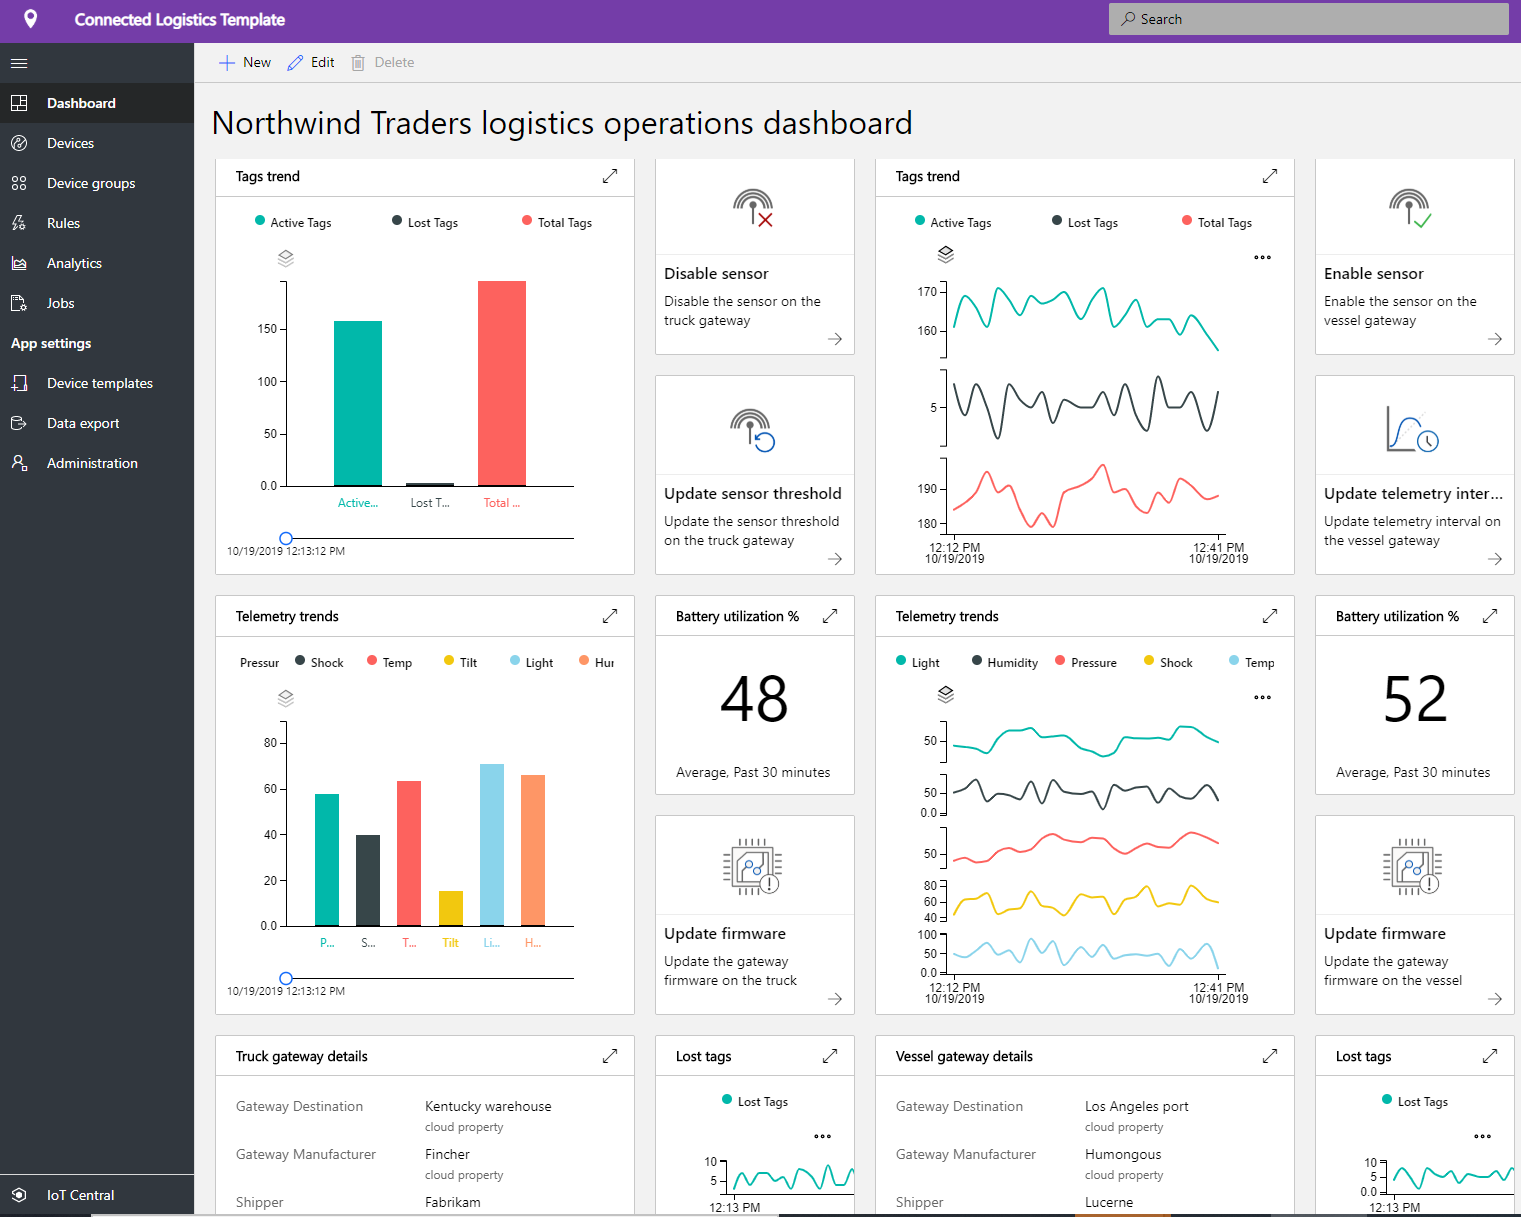 Screenshot that shows the bottom half of the connected logistics operations dashboard.